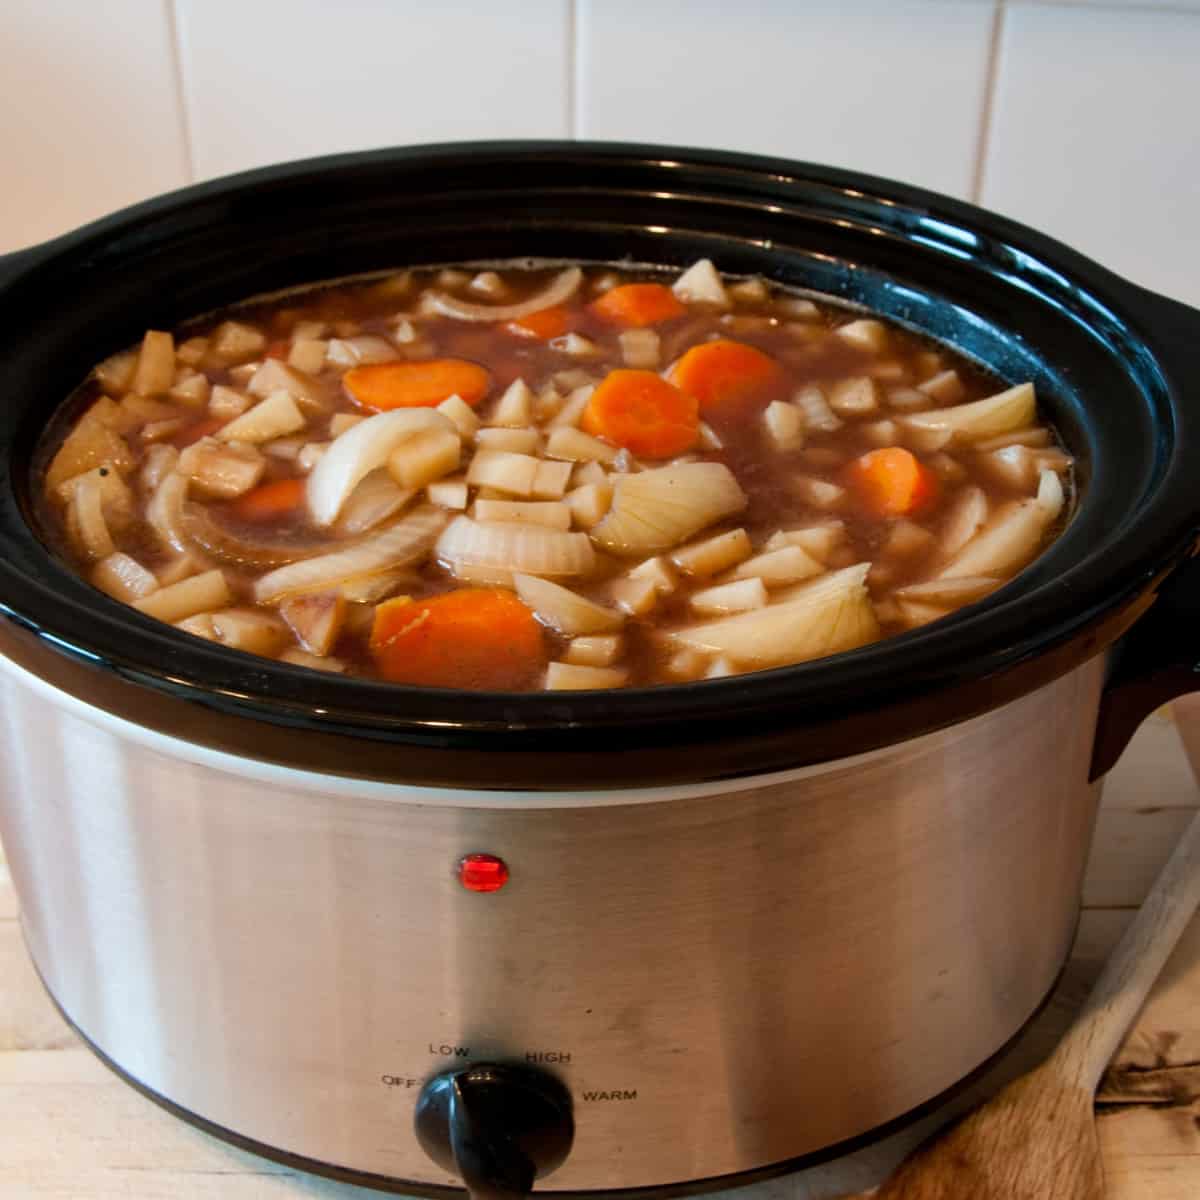 Slow cooker cooking Scouse